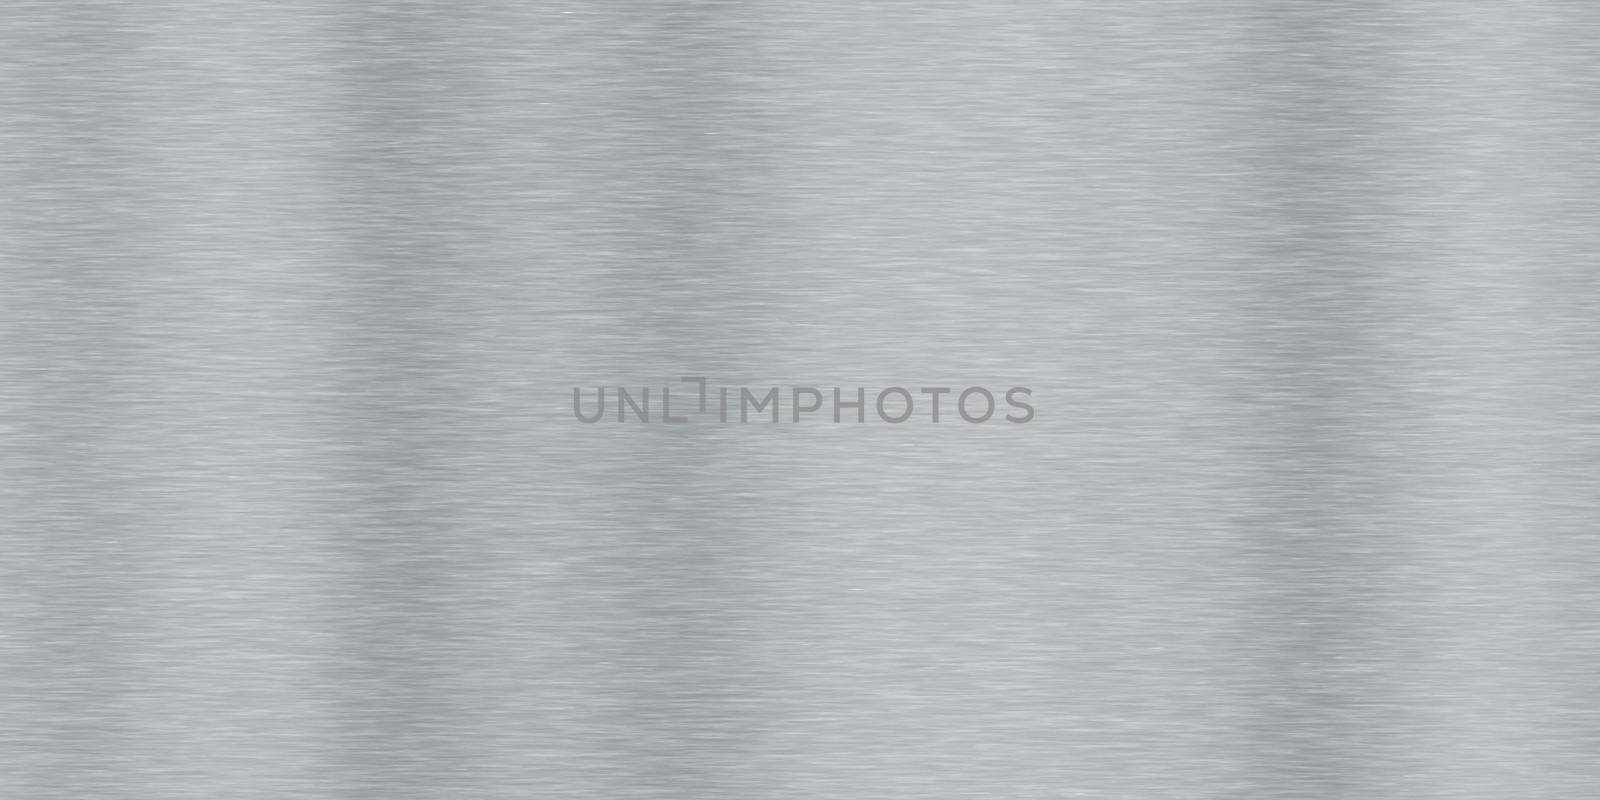 Aluminum shiny polished seamless sheet textures. Stainless brushed metal background material. Horizontal along direction.